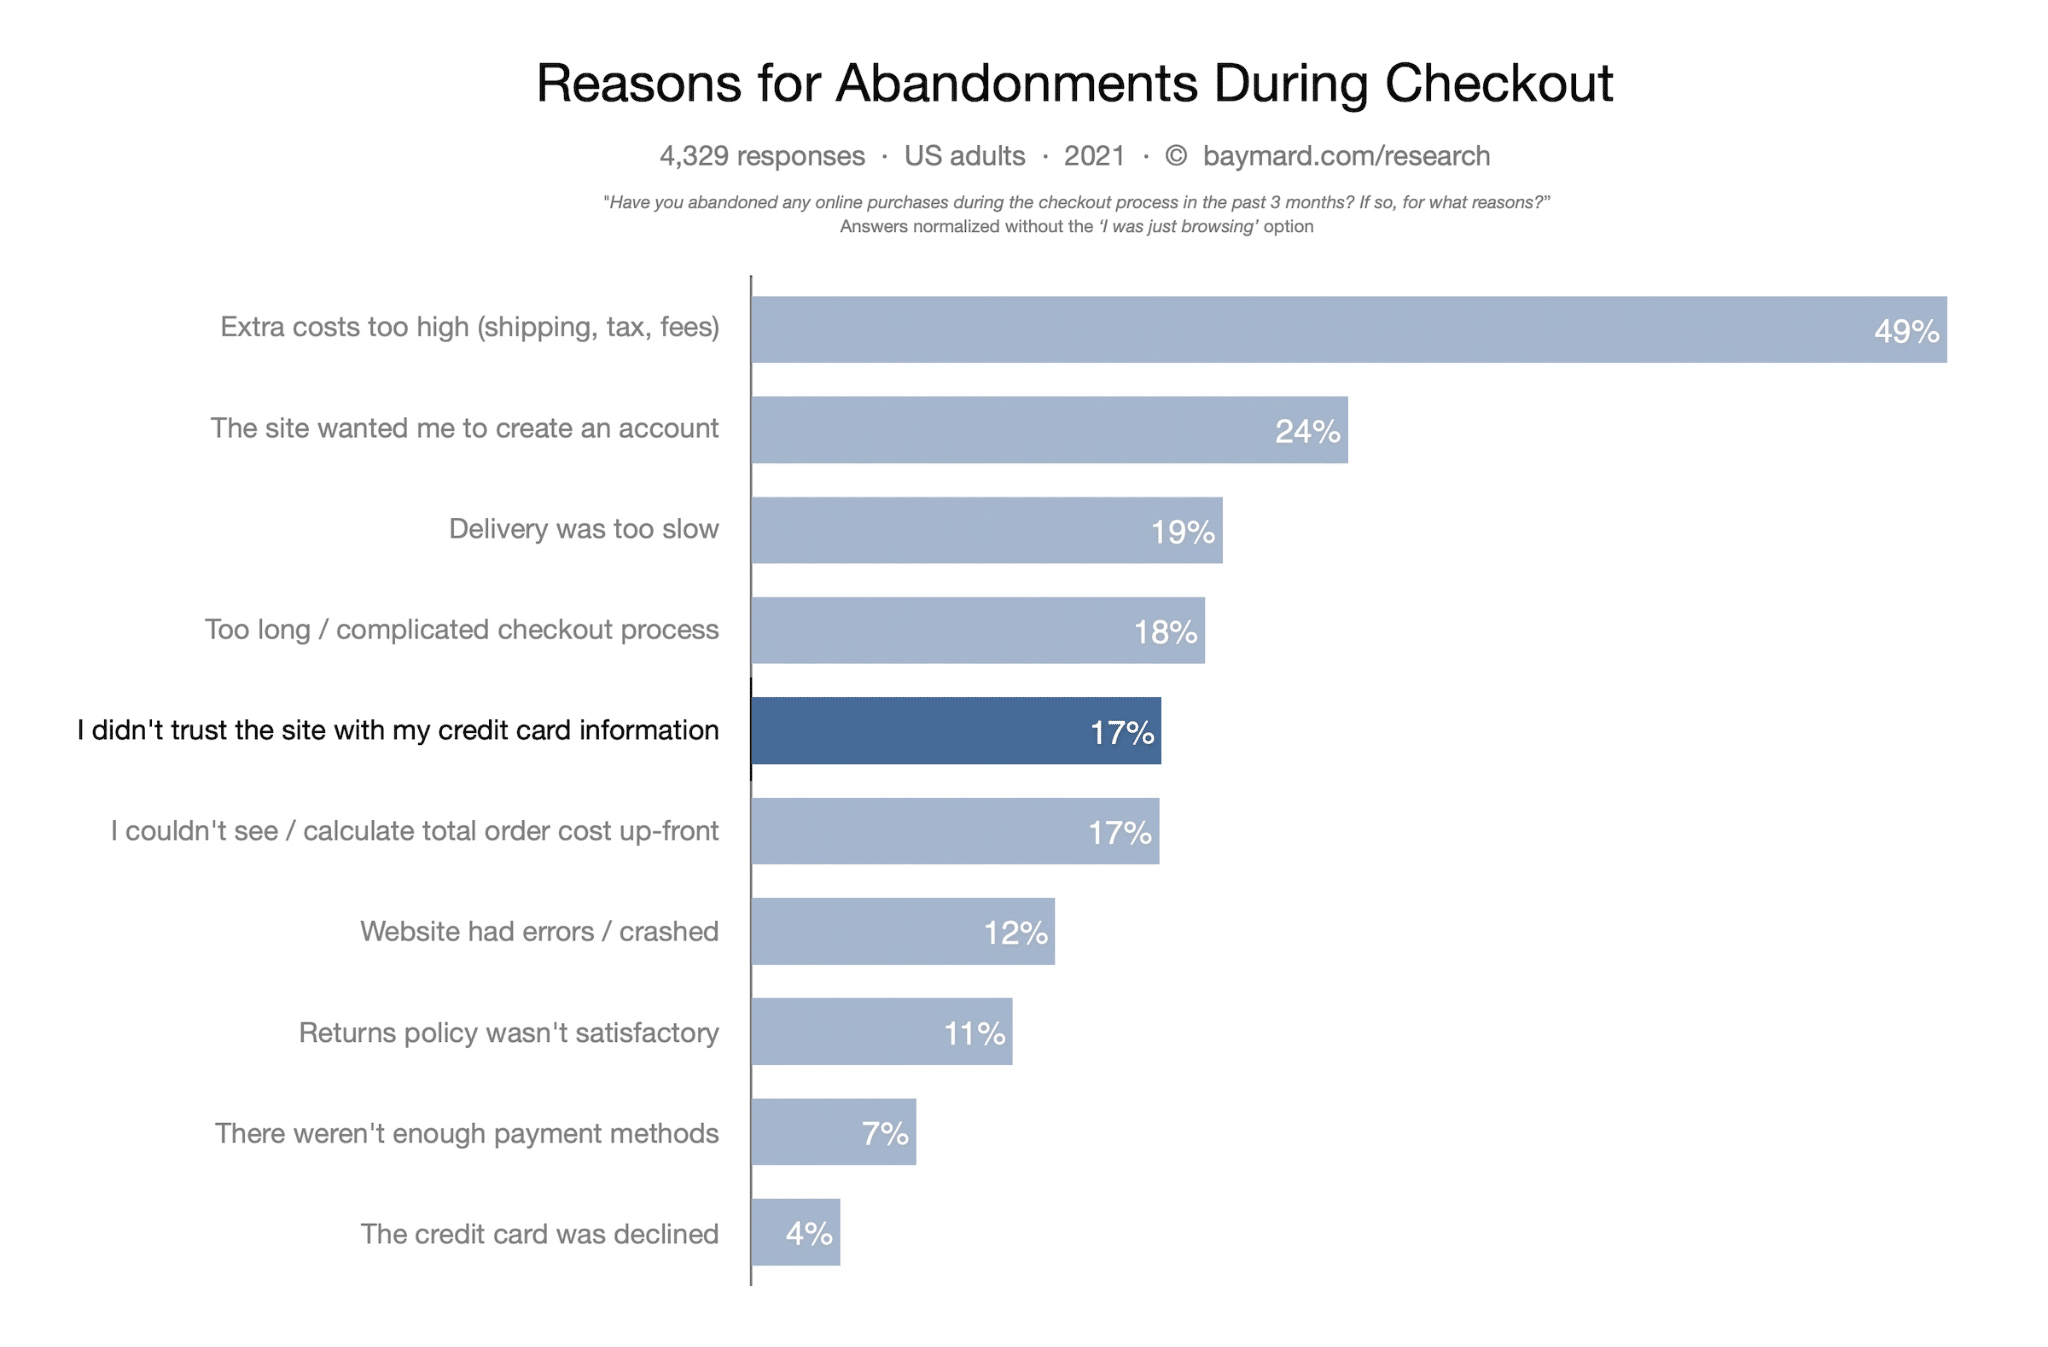 A bar graph titled "Reasons for Abandonments During Checkout," leading with 49% under "Extra costs too high".